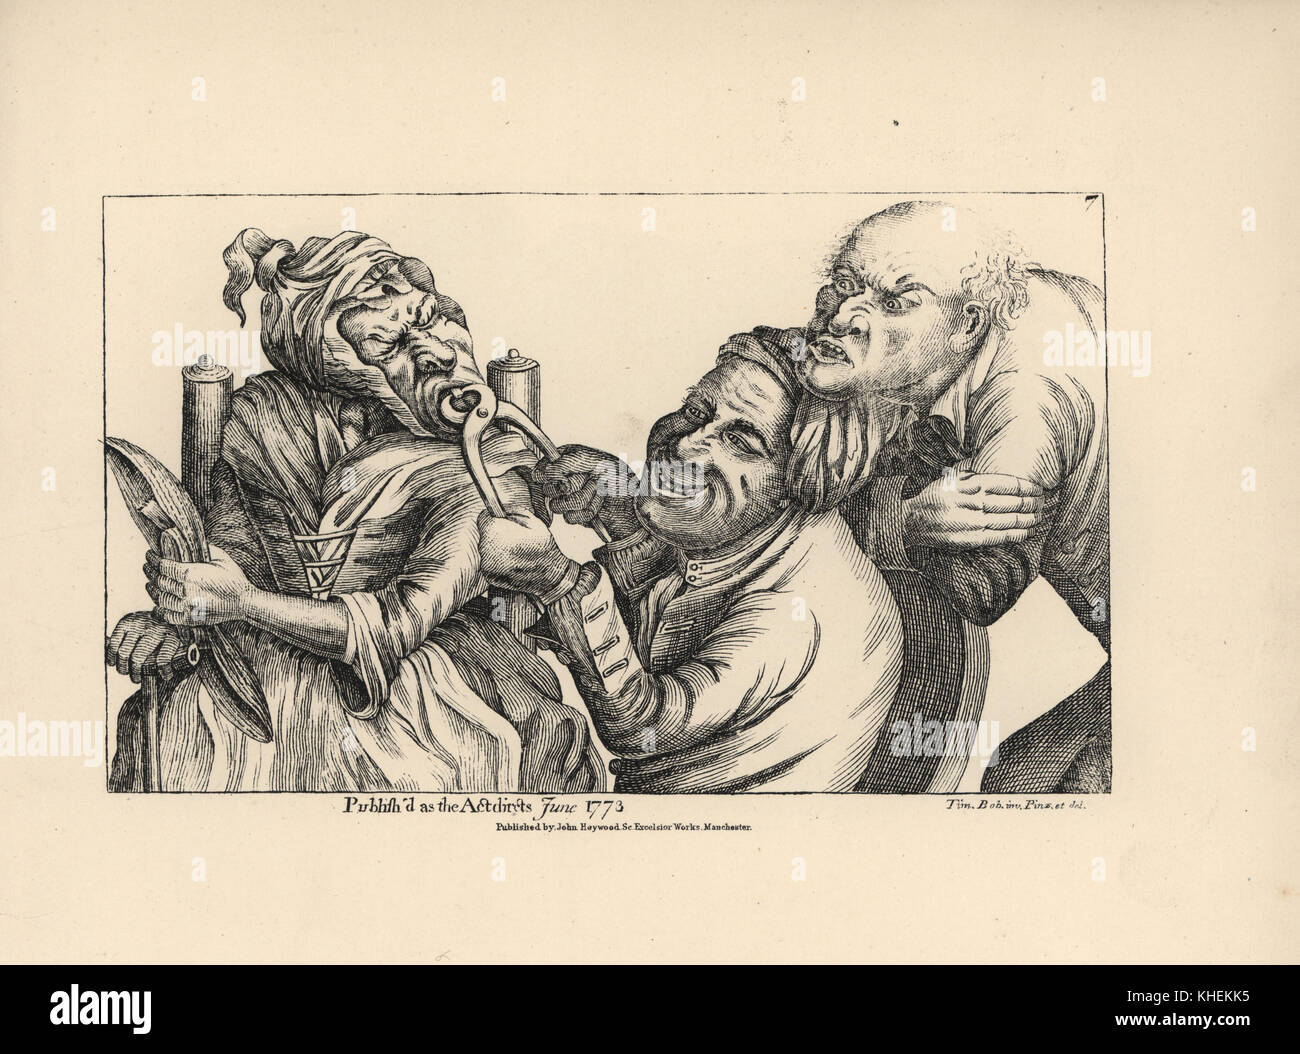 Dentist laughing as he uses pincers to pull a bad tooth from the mouth of an old woman. Copperplate engraving after a satirical illustration by Timothy Bobbin (John Collier) from Human Passions Delineated, John Haywood, Manchester, 1773. Stock Photo